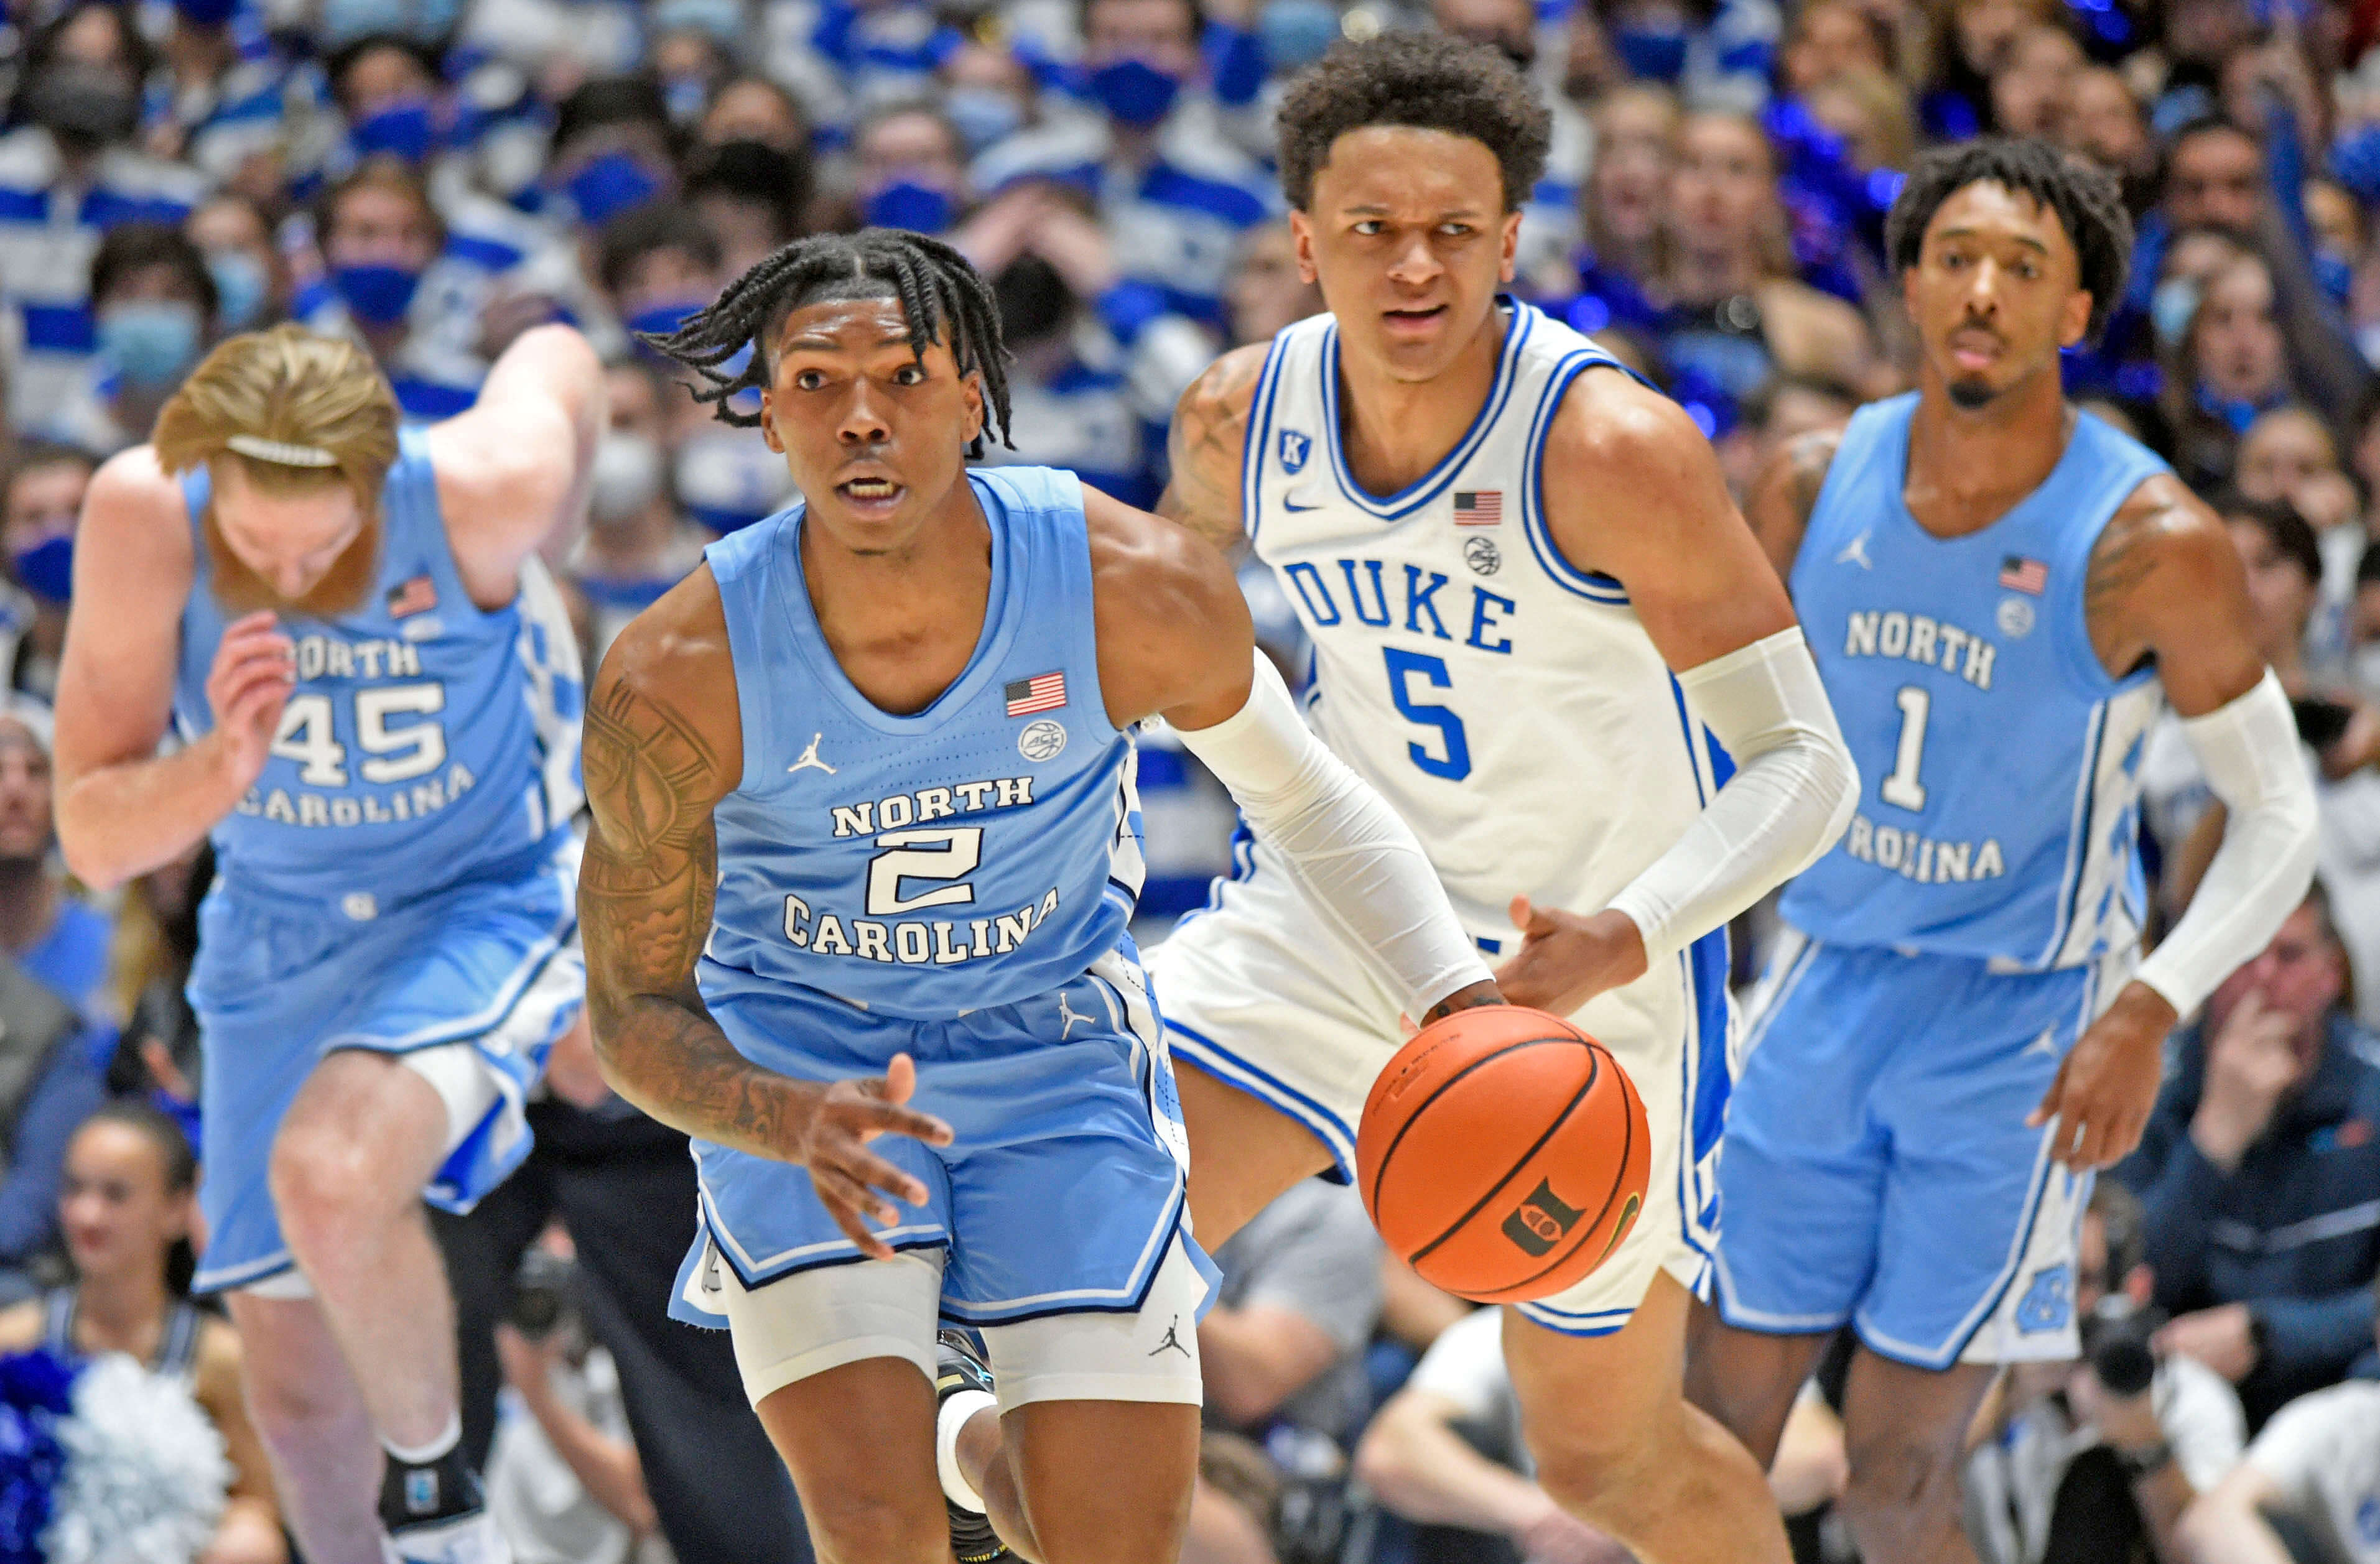 North Carolina vs Duke Final Four Picks: Fade Blue Devils in Highly-Anticipated Rivalry Matchup